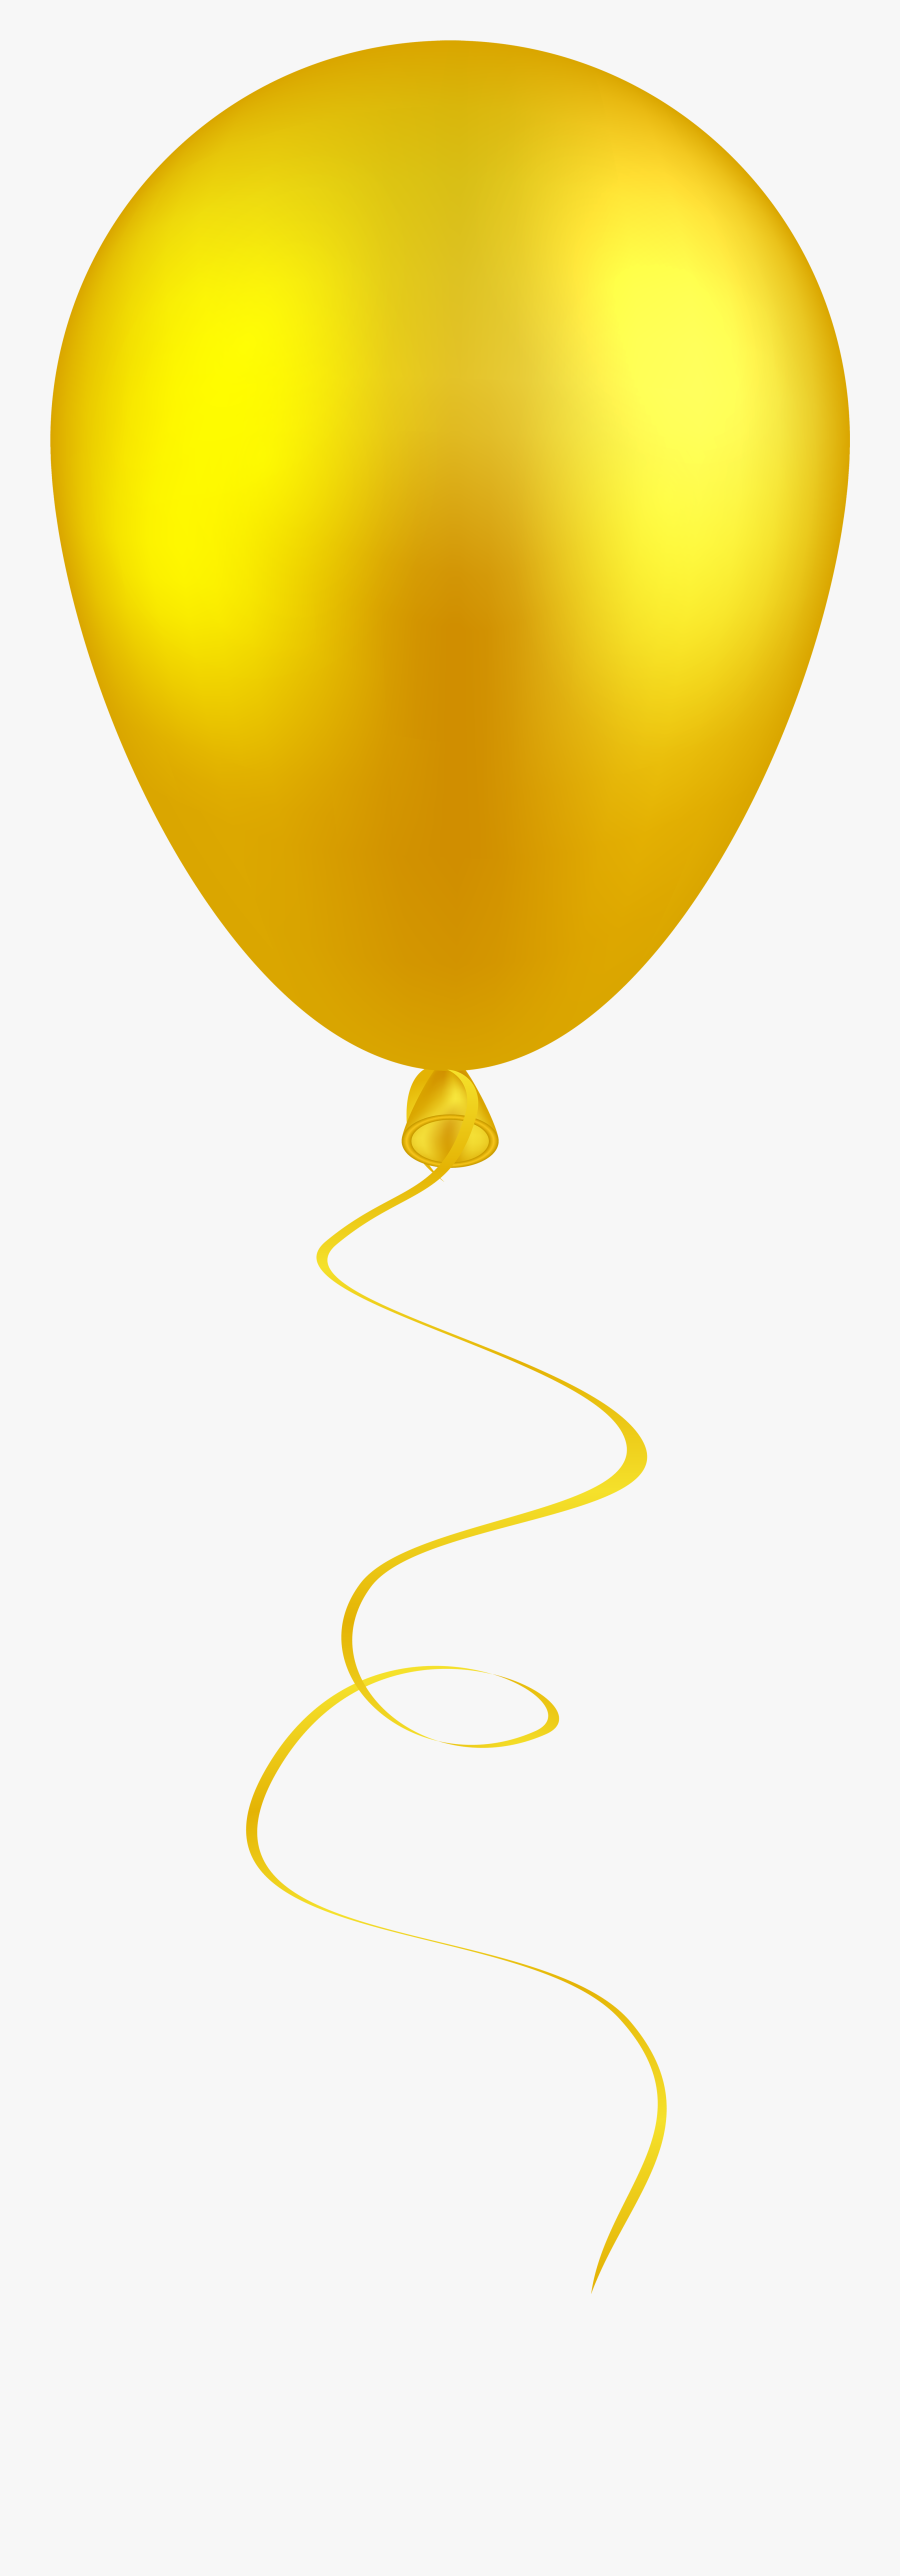 Yellow Gold Balloon Png, Transparent Clipart